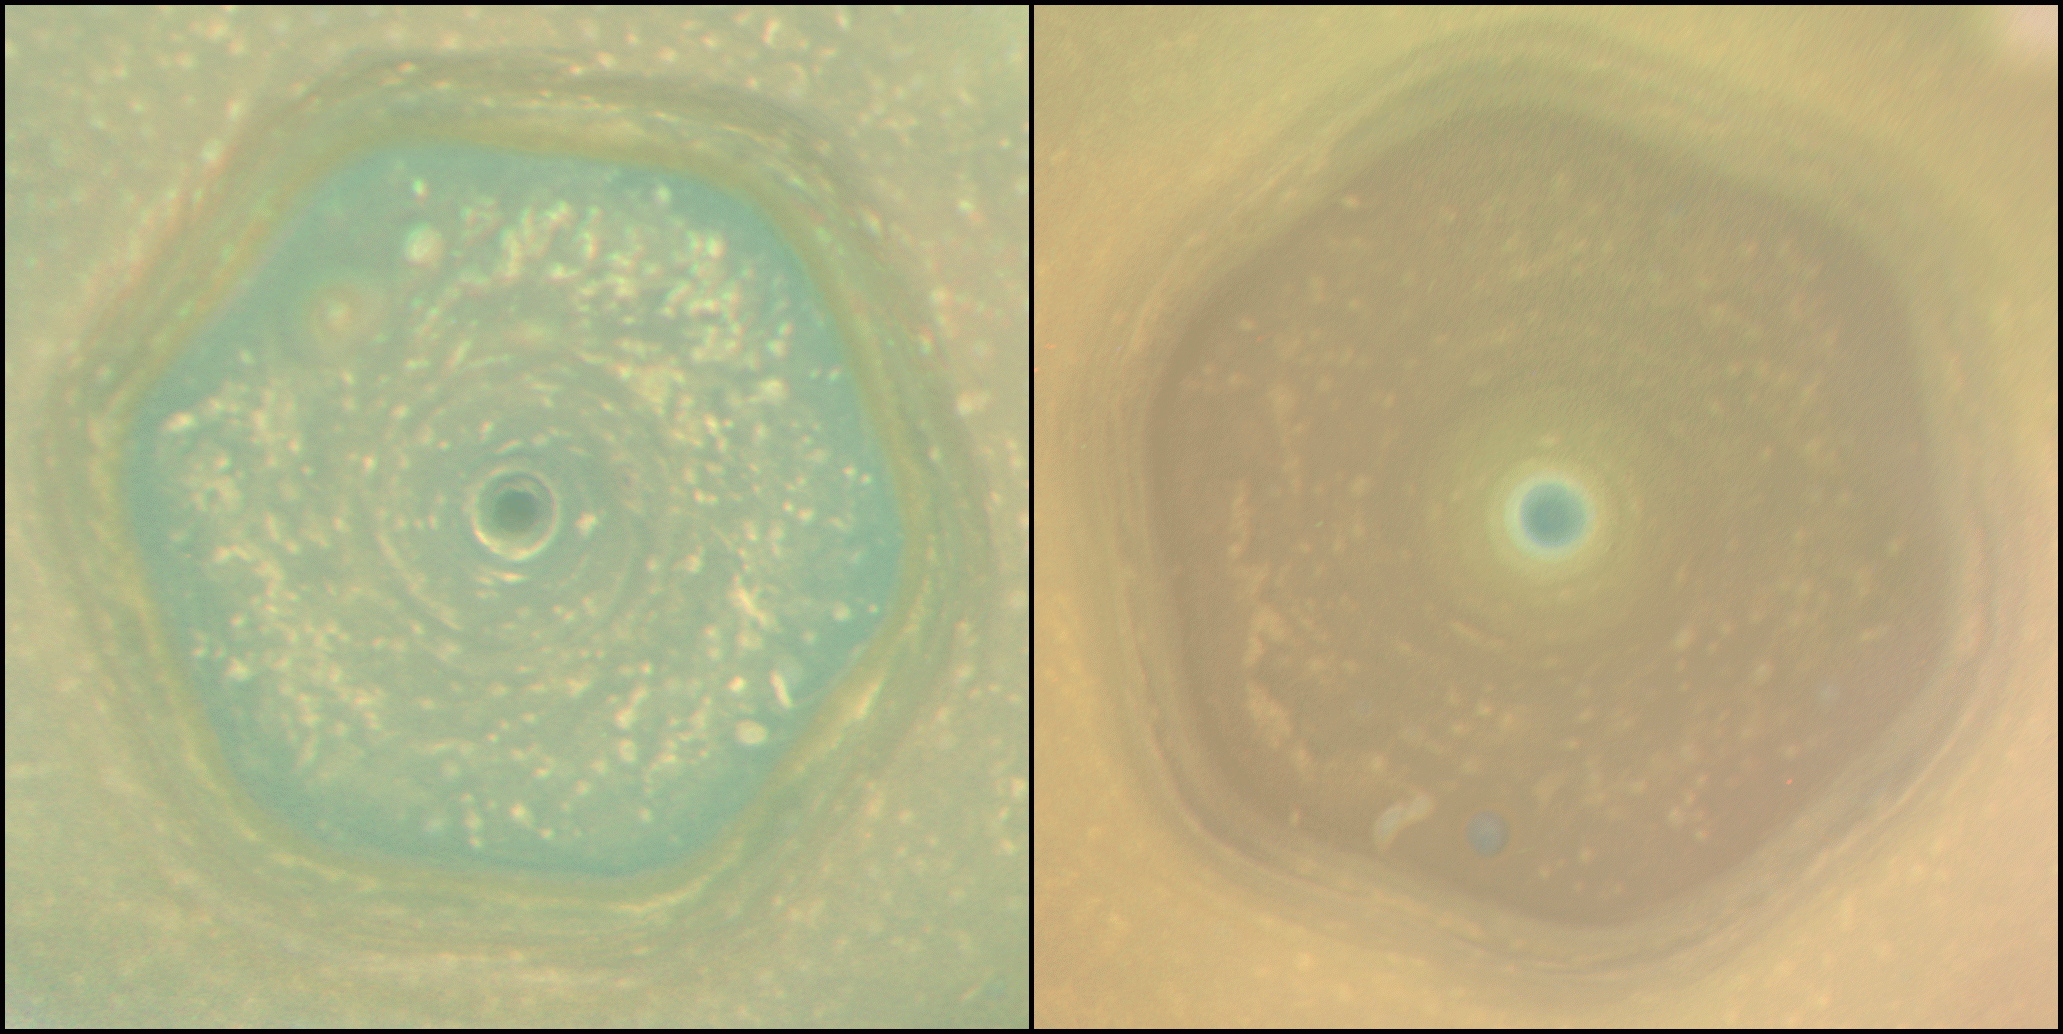 The hexagonal vortex at Saturn's north pole changed color significantly between June 2013 (left) and April 2017 (right), as seen in views from the Cassini spacecraft. For the left image, each frame occurs approximately 130 minutes after the previous one, and for the right, each frame follows after an average of 230 minutes. Researchers combined images taken with the spacecraft's red, green and blue filters for the natural-color views.